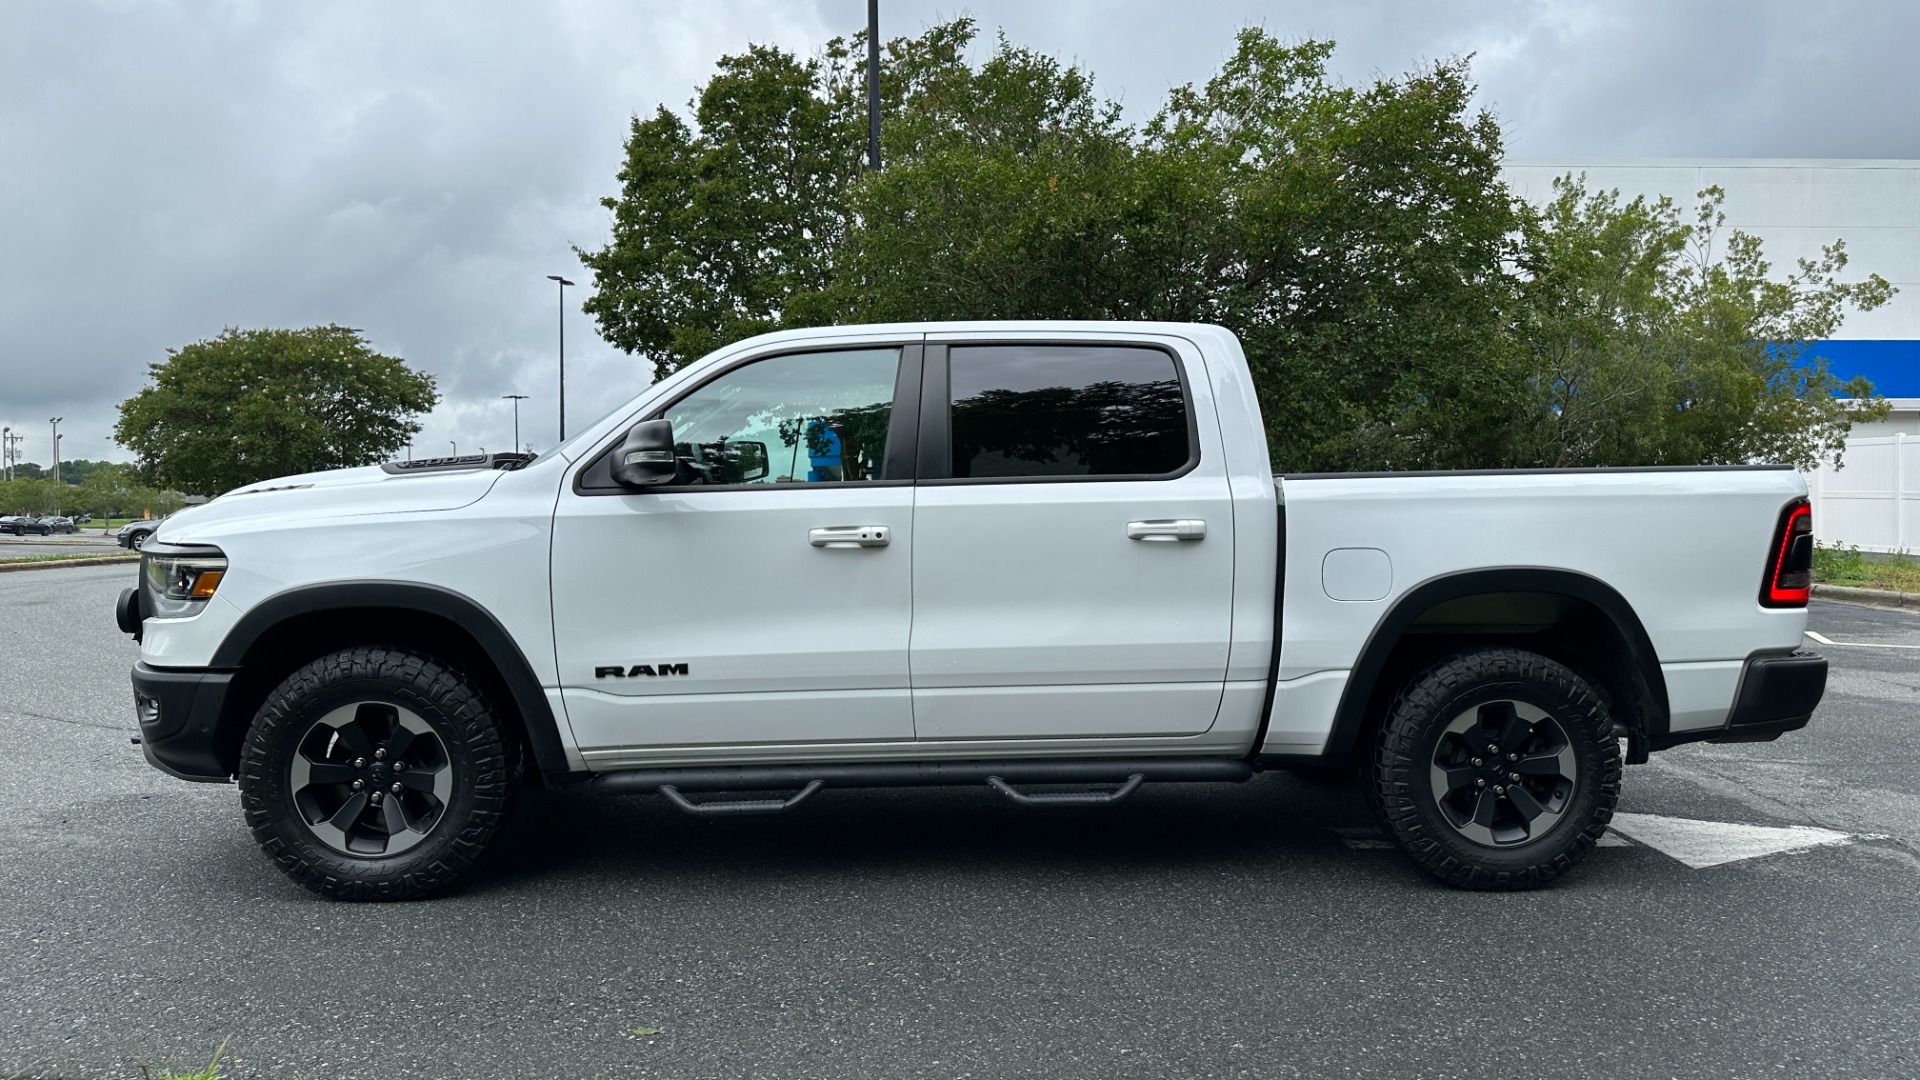 Used 2019 Ram 1500 REBEL / KC LIGHTS / BORLA EXHUAST / ALPINE / TOUCH SCREEN for sale $36,995 at Formula Imports in Charlotte NC 28227 6